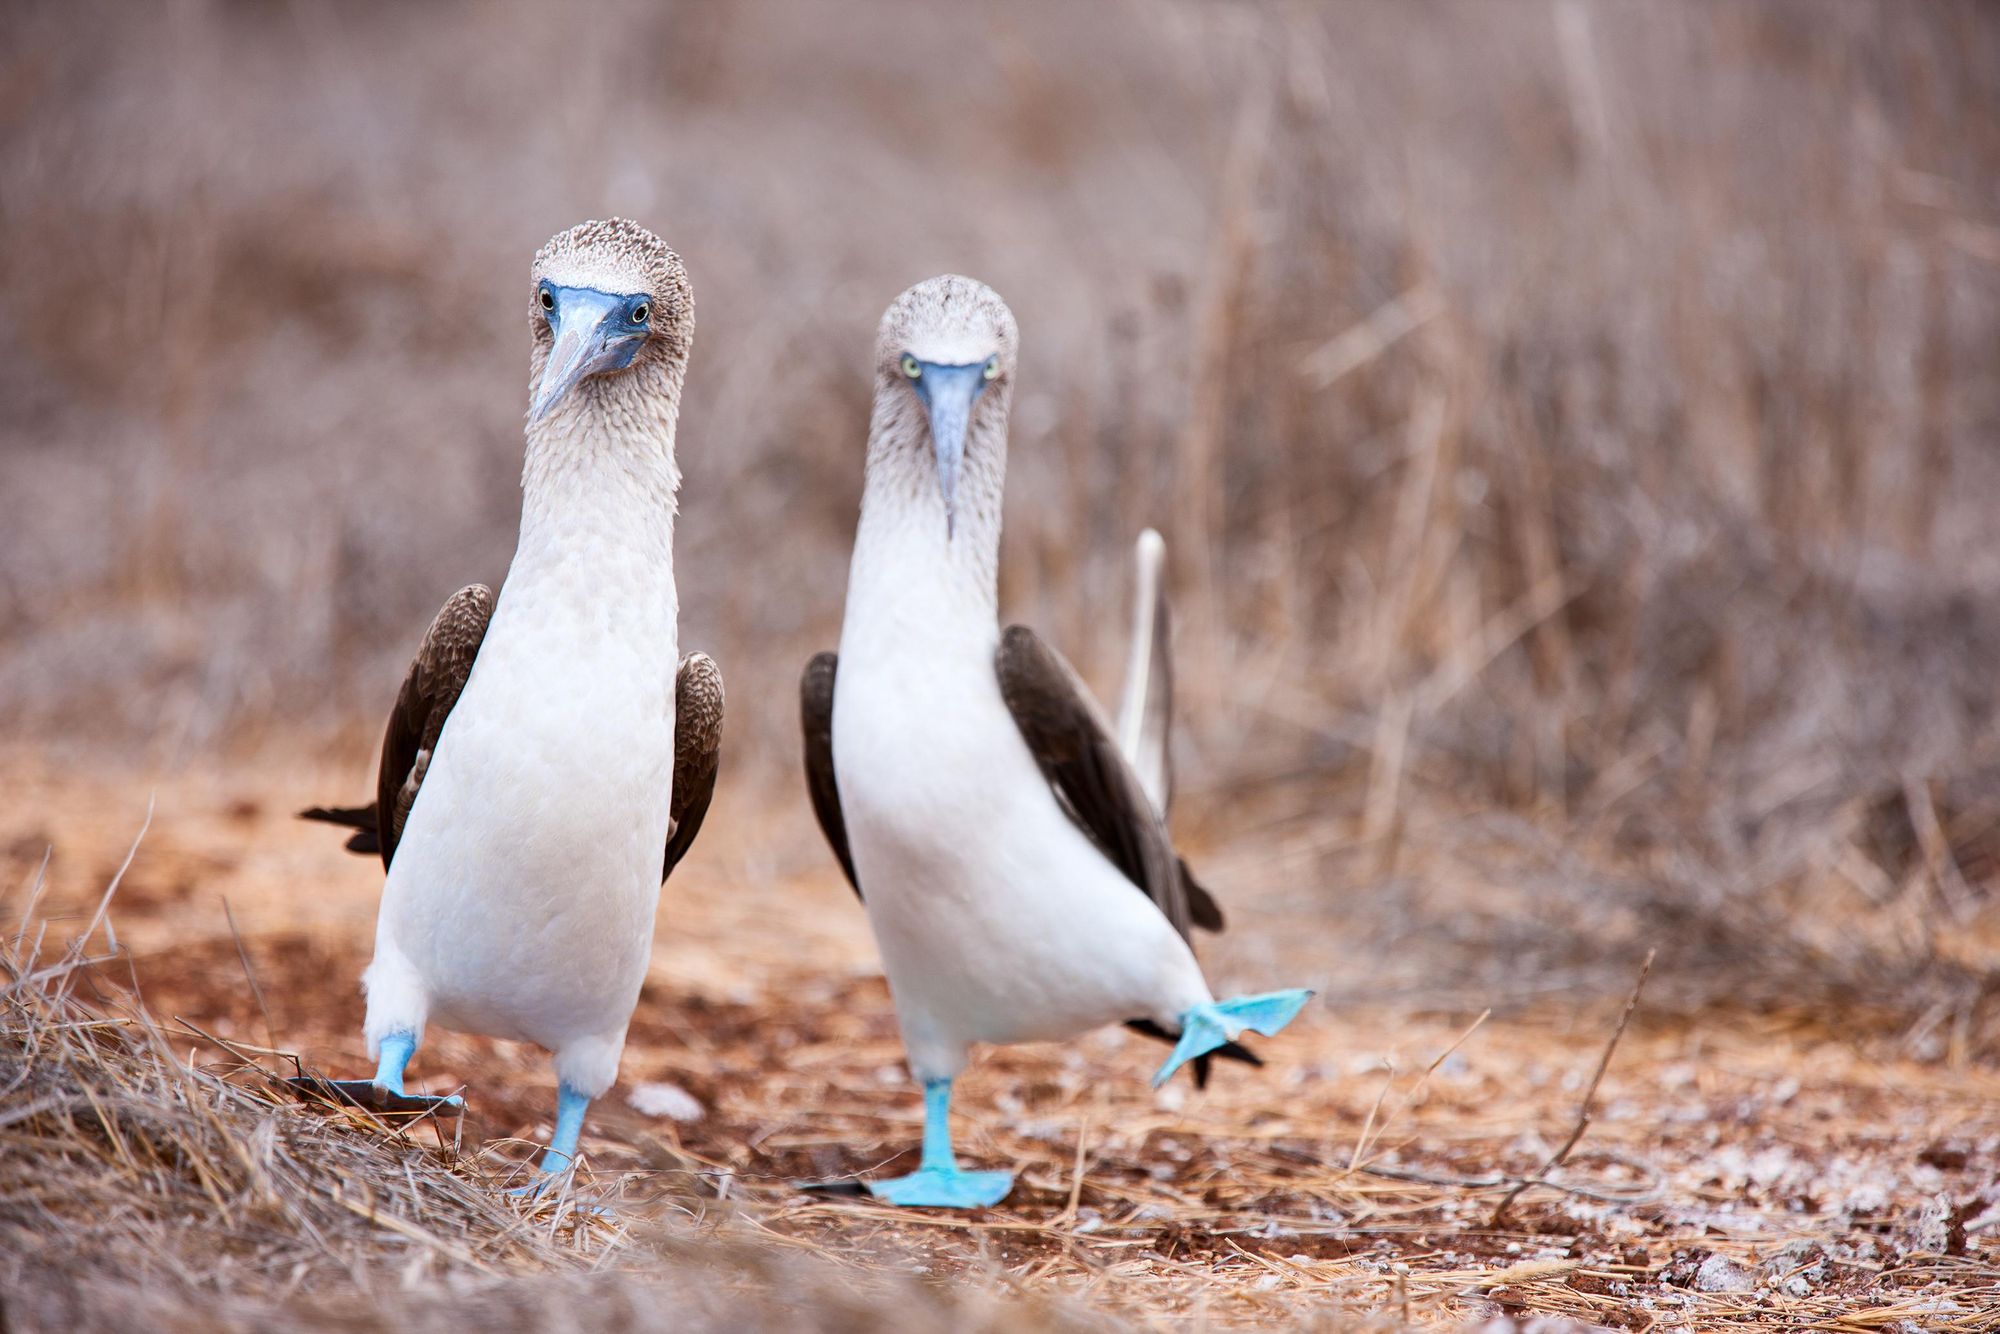 A couple of blue-footed boobies exploring the Galapagos Islands. Photo: Getty